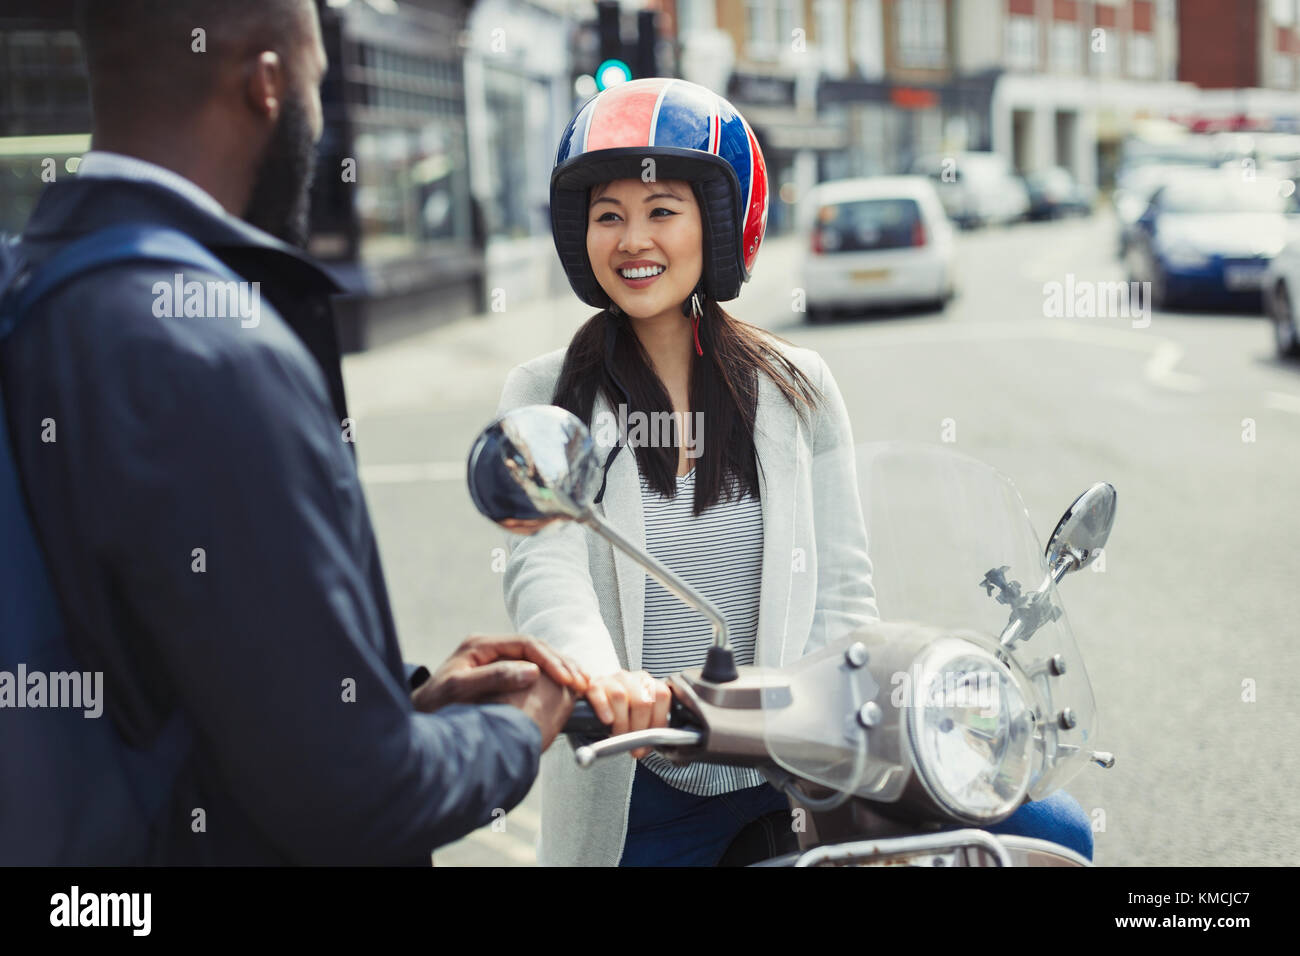 Smiling young woman on motor scooter talking to friend on sunny urban street Stock Photo